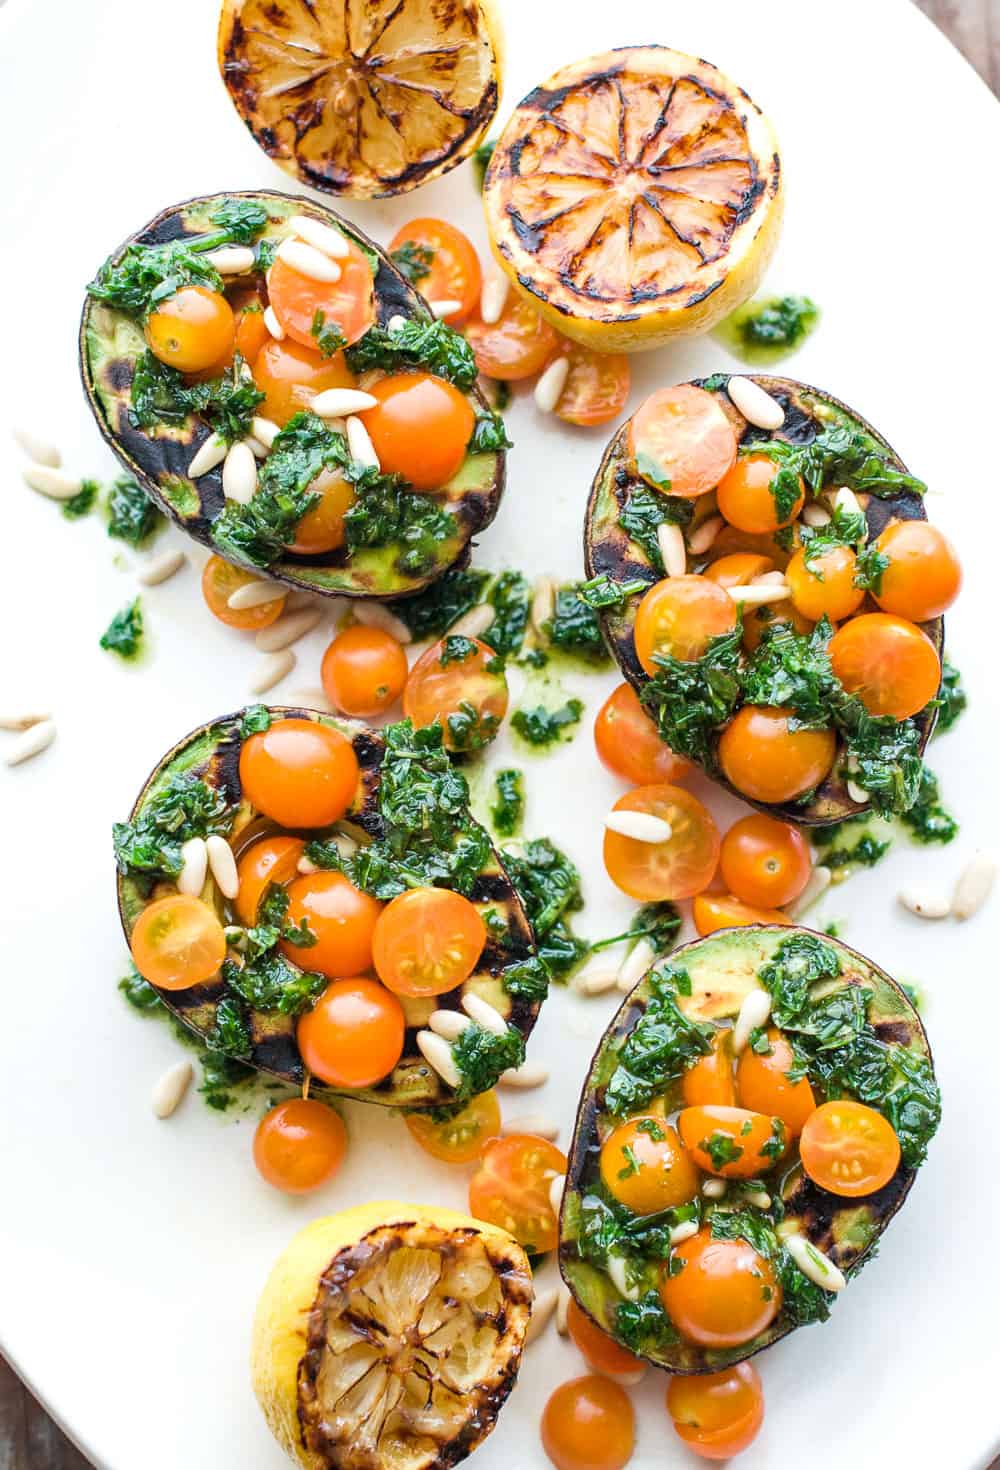 Grilled avocado filled with basil, cherry tomatoes, and pine nuts